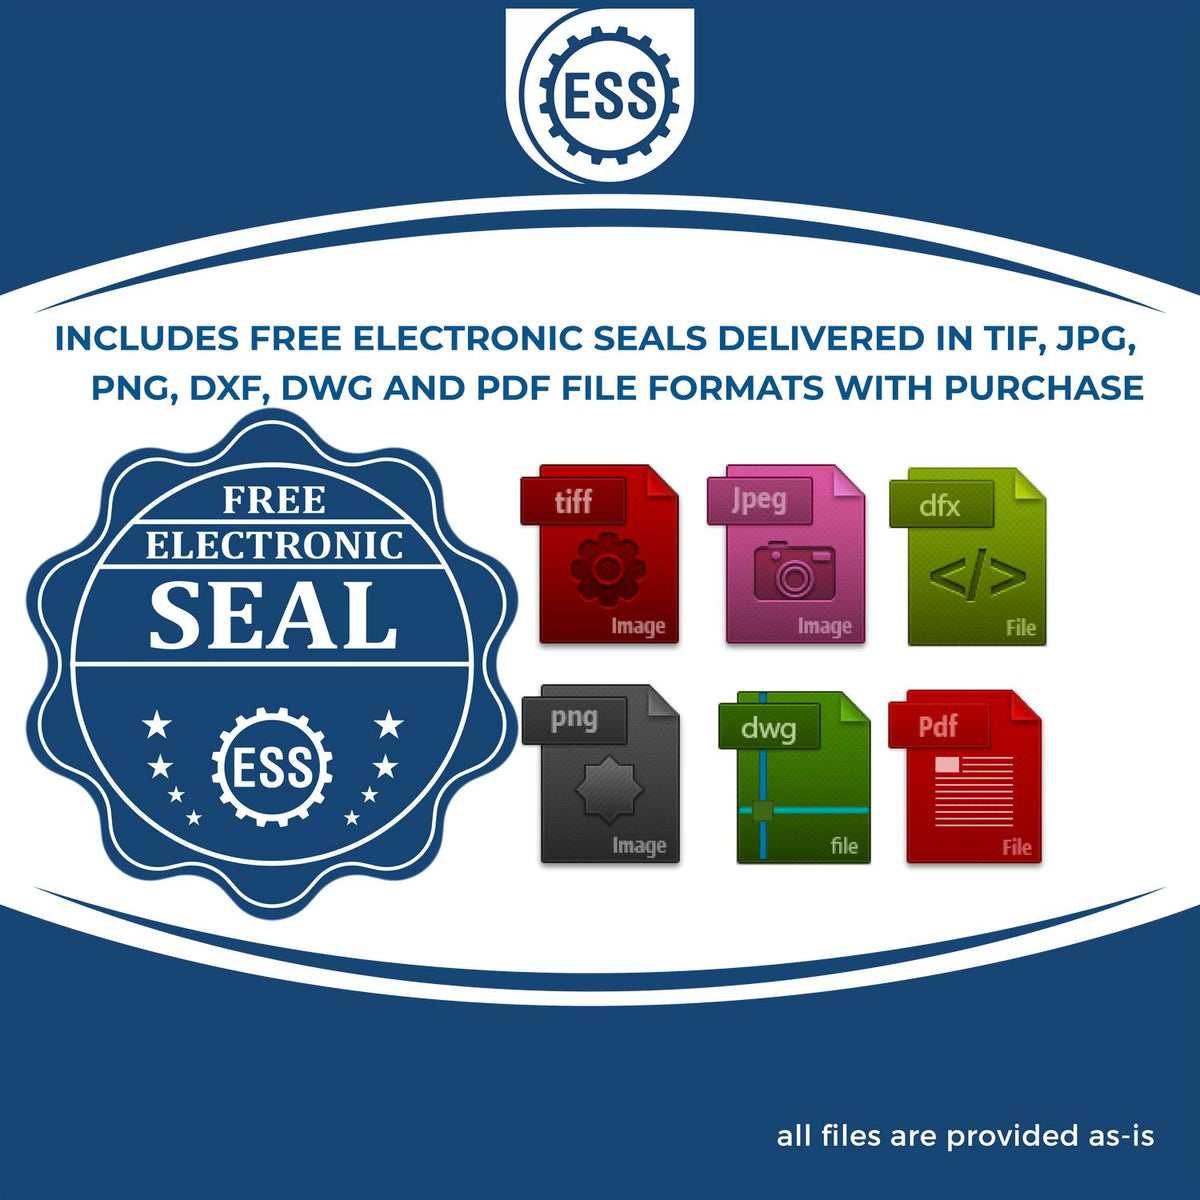 An infographic for the free electronic seal for the Hybrid Nevada Landscape Architect Seal illustrating the different file type icons such as DXF, DWG, TIF, JPG and PNG.